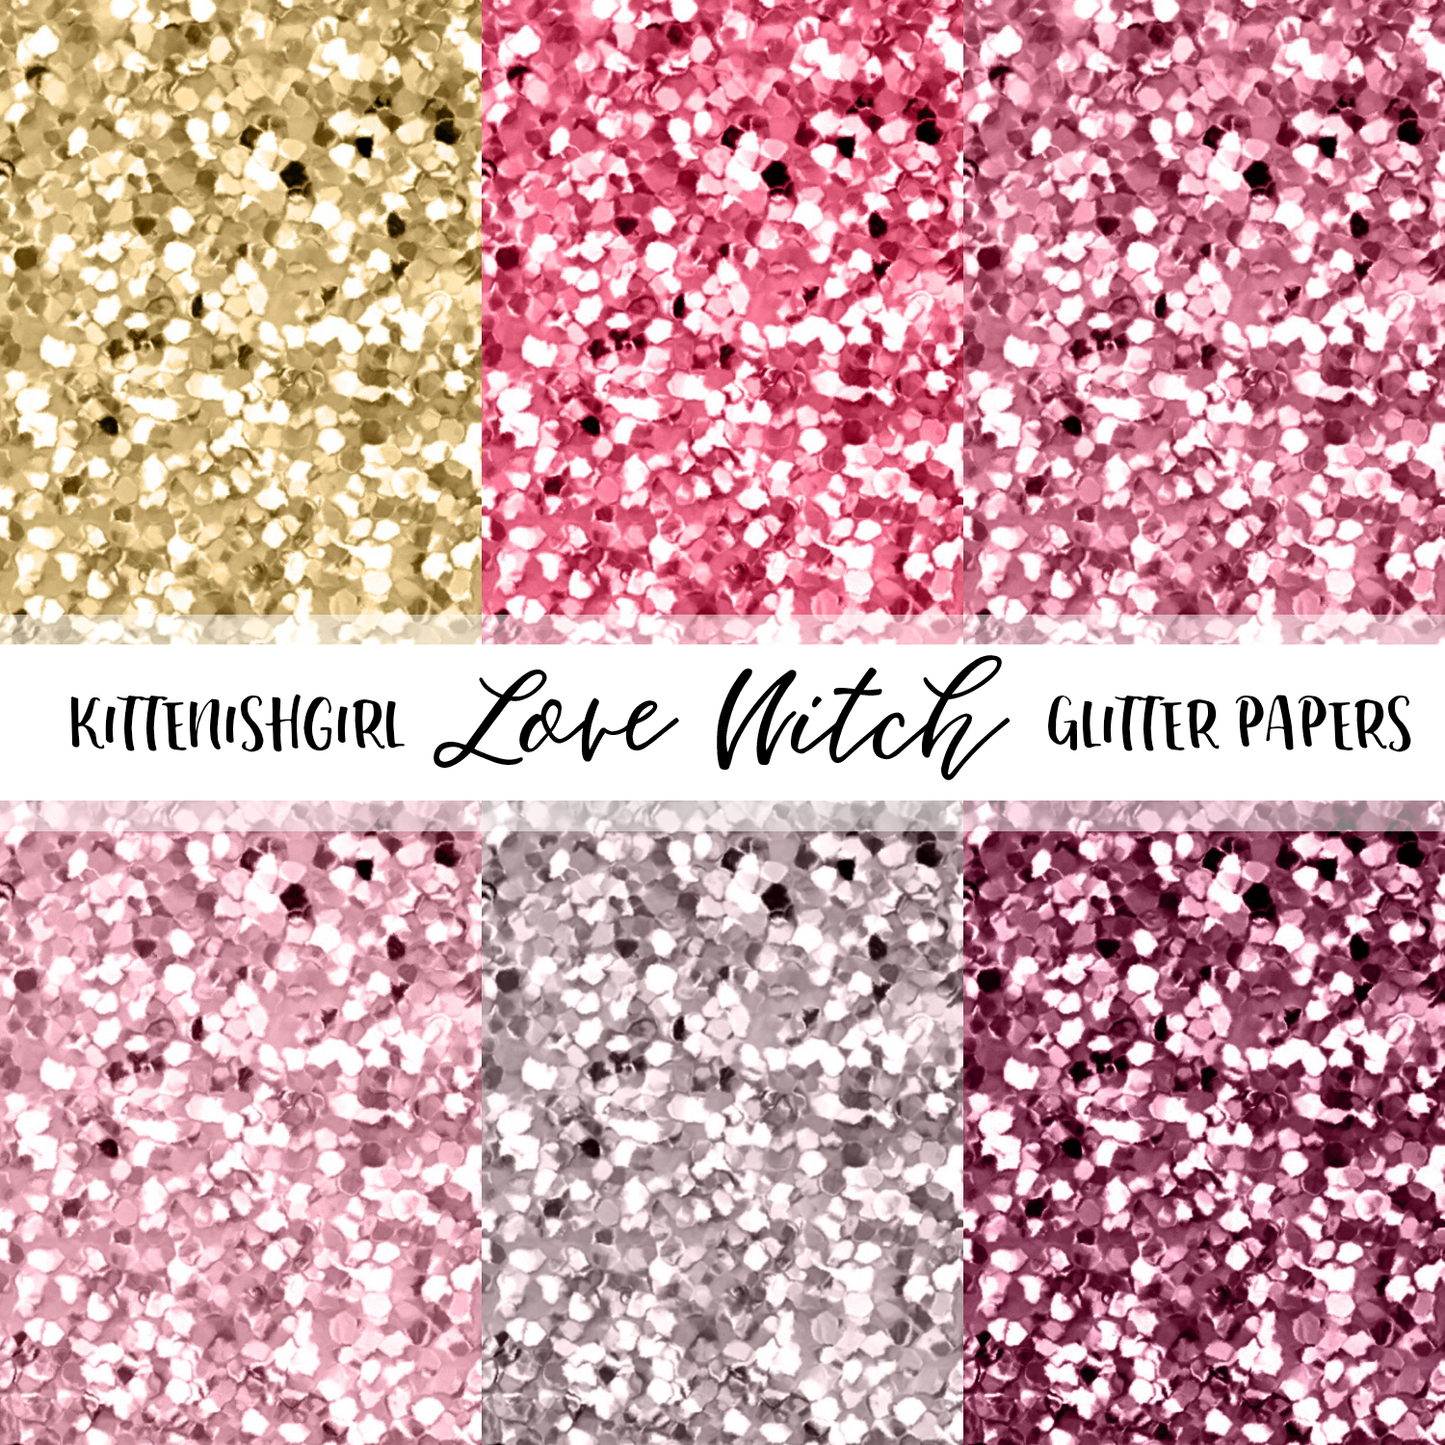 Love Witch // Glitter Digital Papers